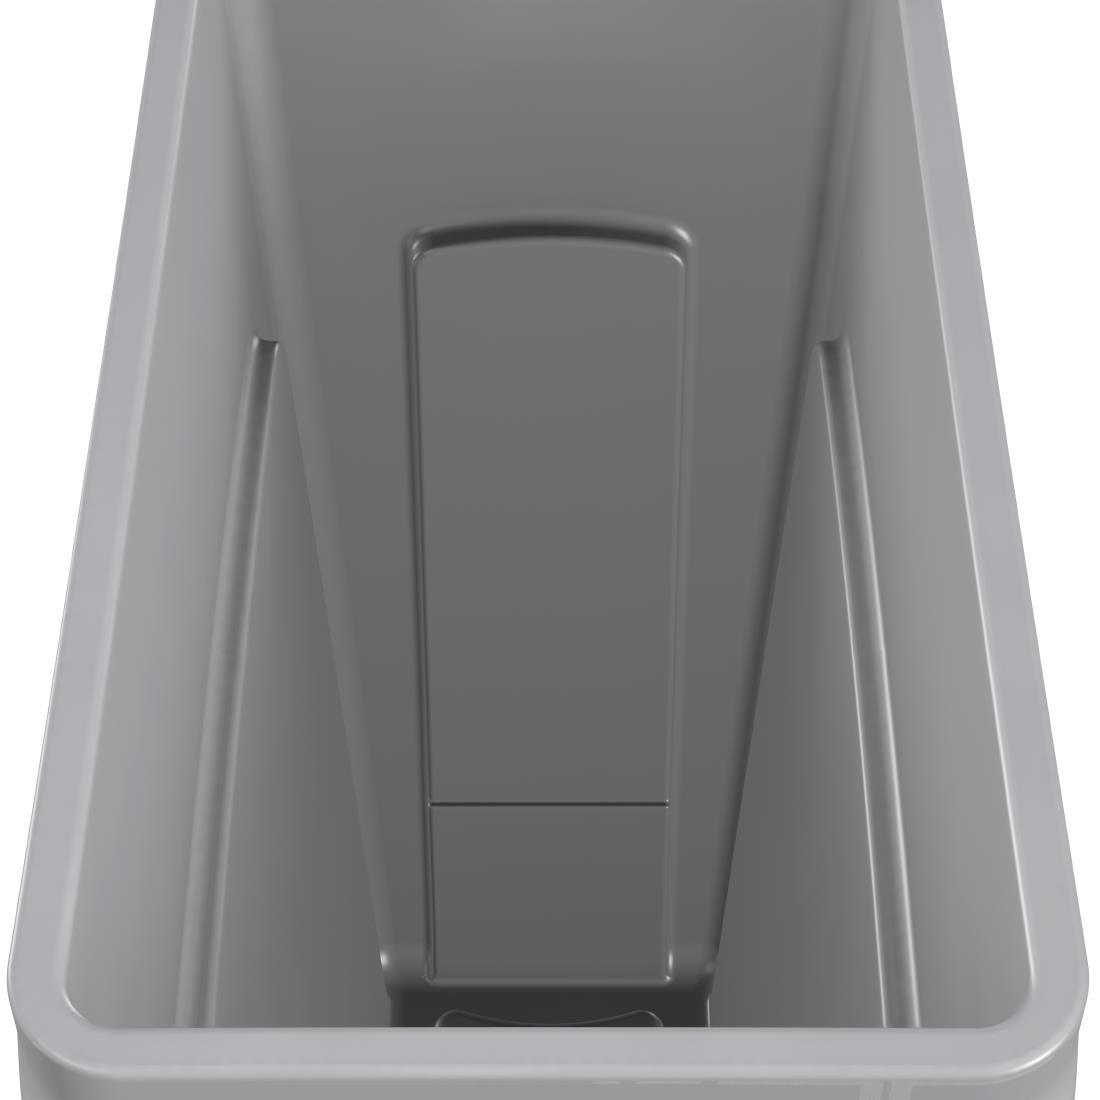 Rubbermaid Slim Jim Container With Venting Channels Grey 60Ltr - F603  - 10